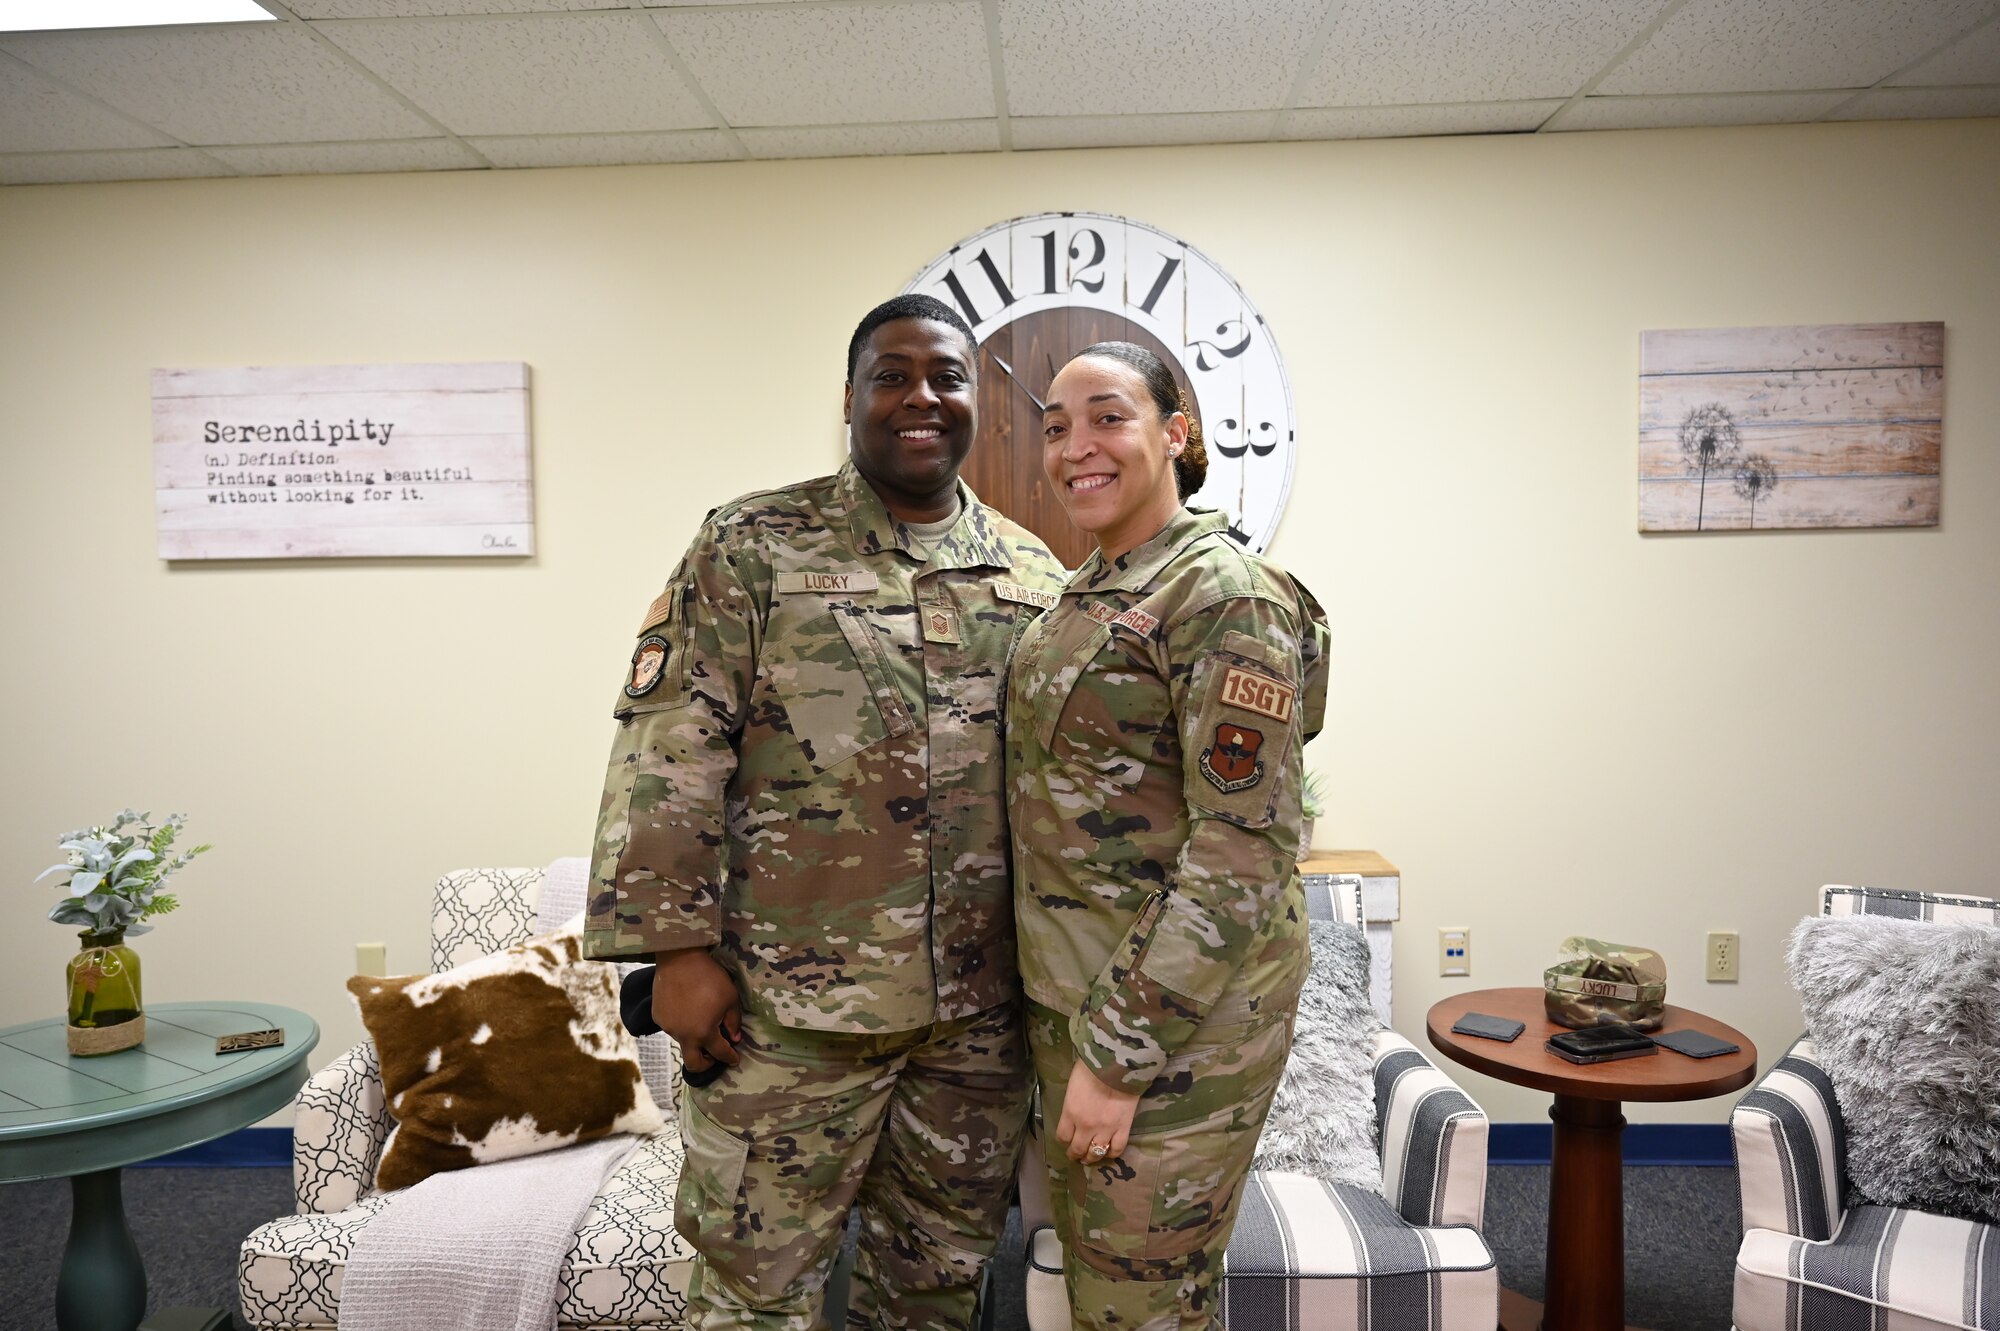 U.S. Air Force Master Sgt. Kelvin Lucky, 97th Security Forces Squadron operations superintendent, poses with his wife, Master Sgt. JaNiece Lucky, 97th Logistics Readiness Squadron first sergeant, in the Airmen Resiliency Center at Altus Air Force Base, Oklahoma, Feb. 10, 2023. Kelvin and JaNiece met in 2006 at Kirtland Air Force Base, New Mexico, during security forces training and were married in 2009. (U.S. Air Force photo by Airman 1st Class Kari Degraffenreed)